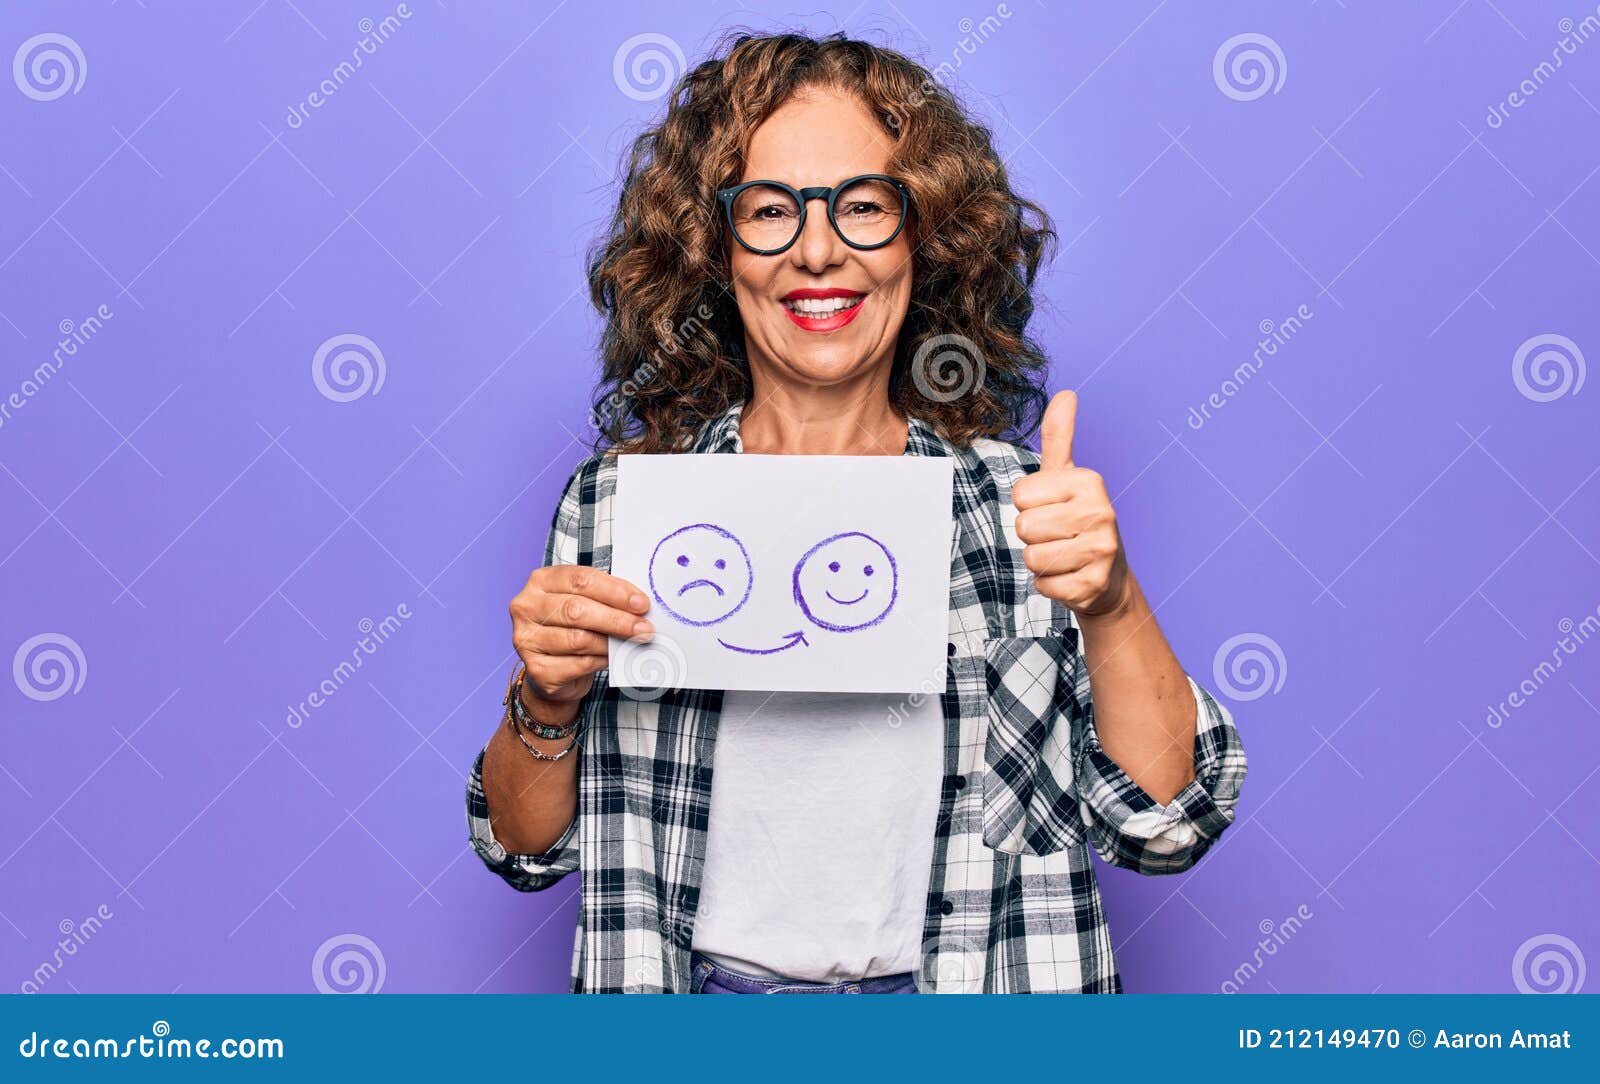 Middle Age Woman Asking For Emotion Change Holding Paper With Unhappy To Happy Face Emoji Smiling Happy And Positive Thumb Up Stock Photo Image Of Woman Success